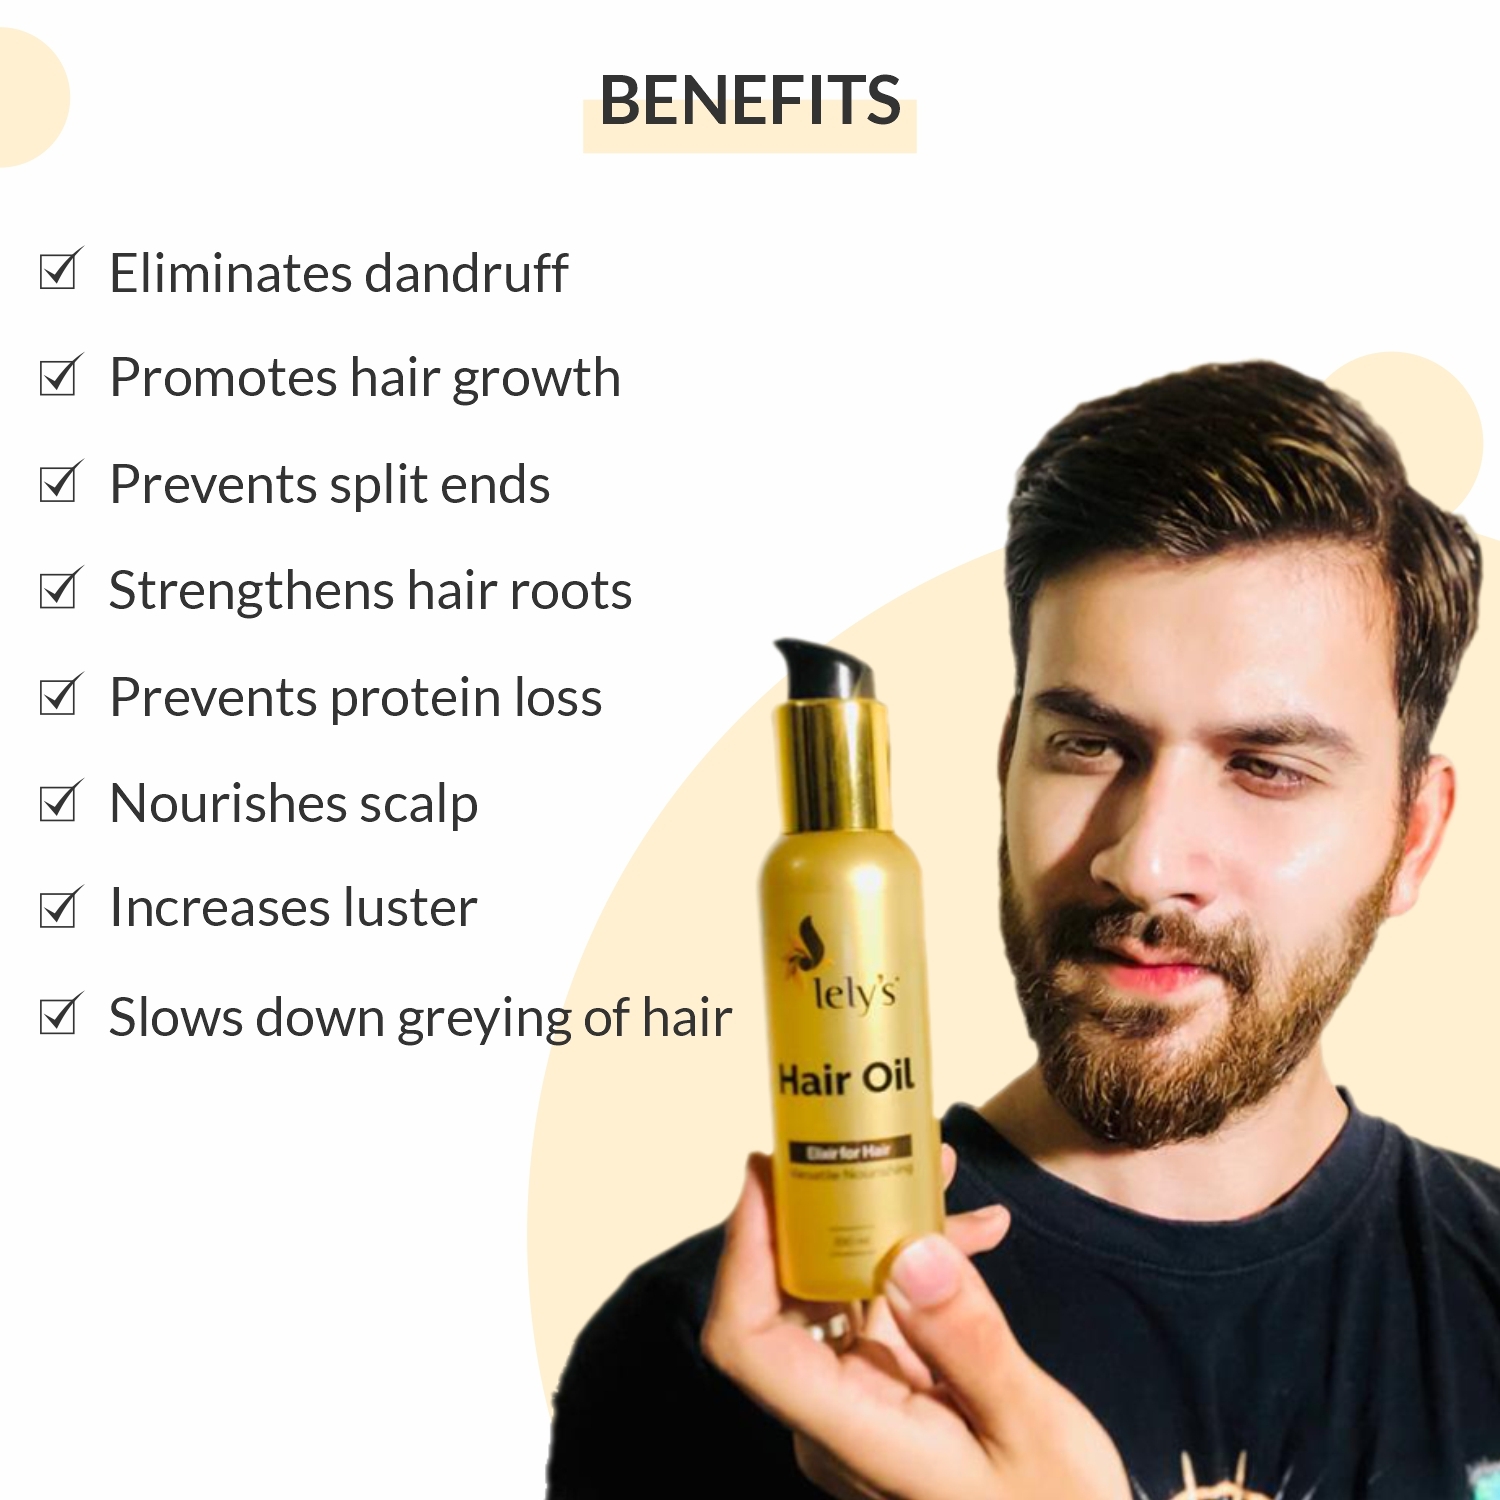 lely's | Lely’s Hair Oil For Hair Growth - Transforms Dry-Brittle Hair Into Silky, Reduces Hair Fall, Shiny And Smooth Hair, Soft And Firm Hair, Repairs Split Ends, Control Hair Damage - 100 Ml 1